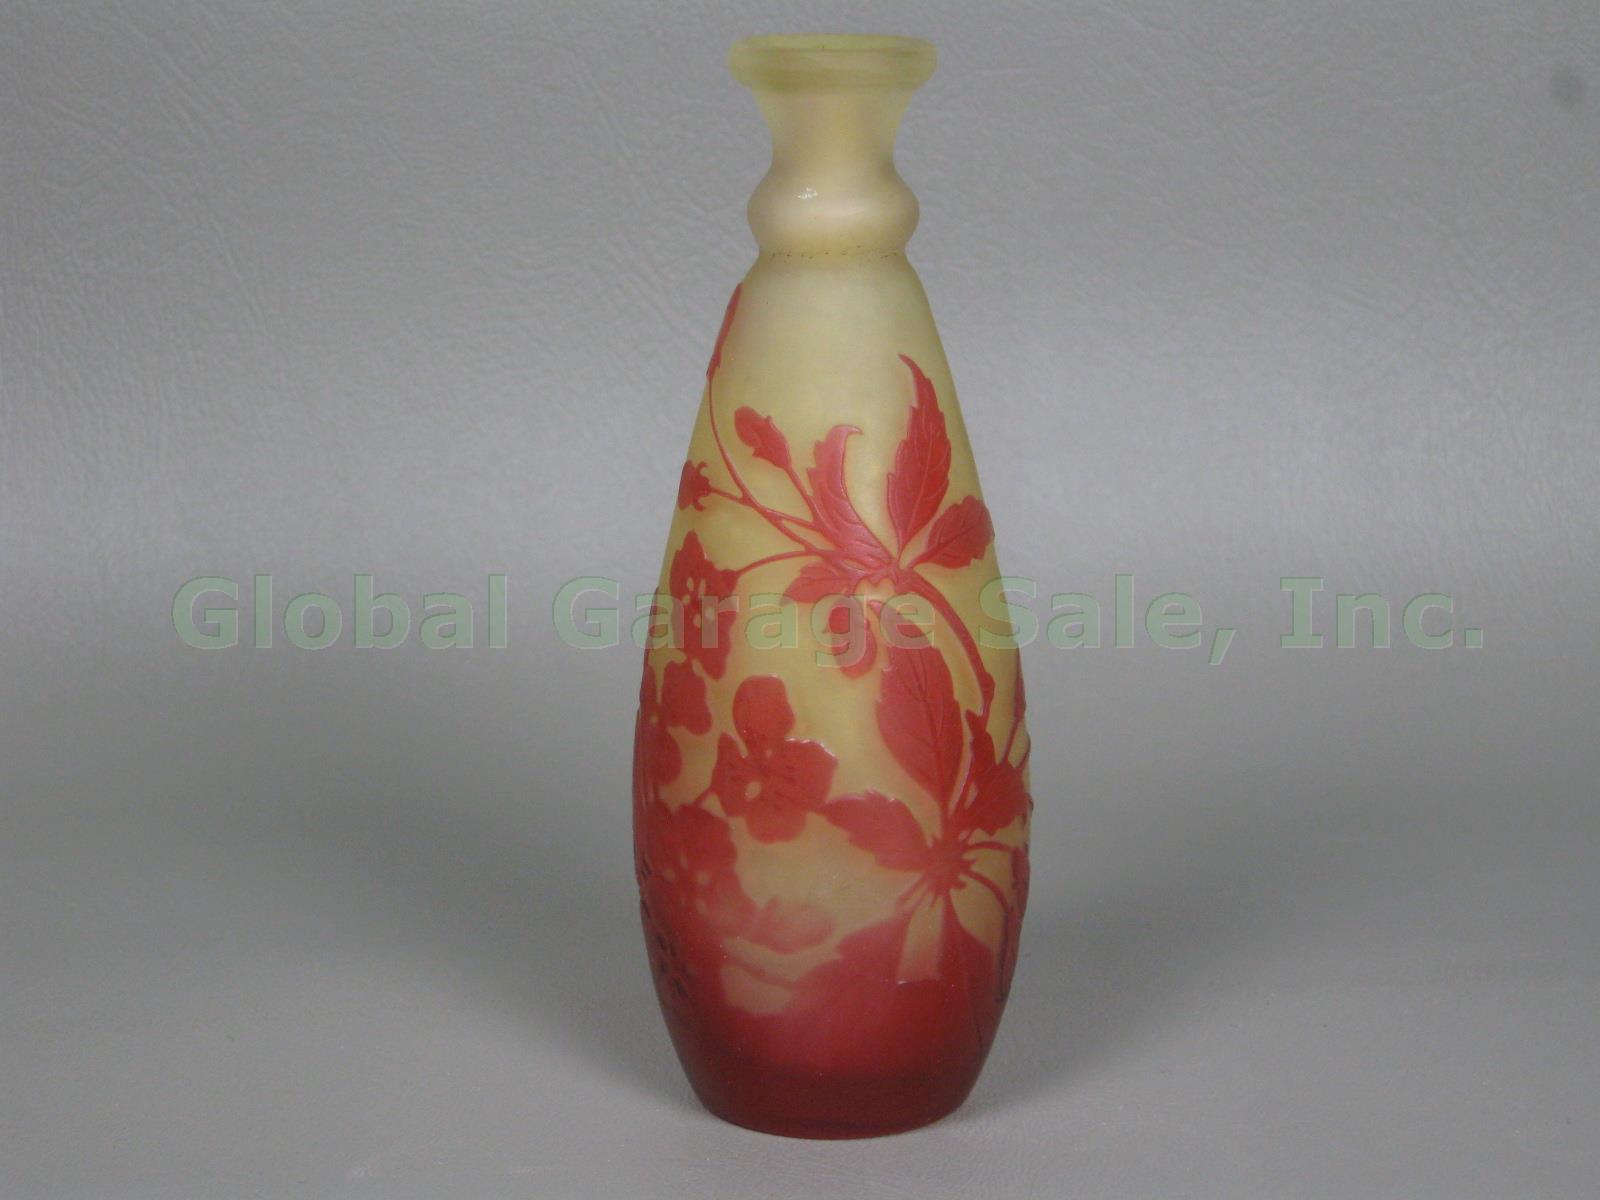 Antique Emile Galle Signed Cameo Art Glass Perfume Bottle Bud Vase Red & Yellow